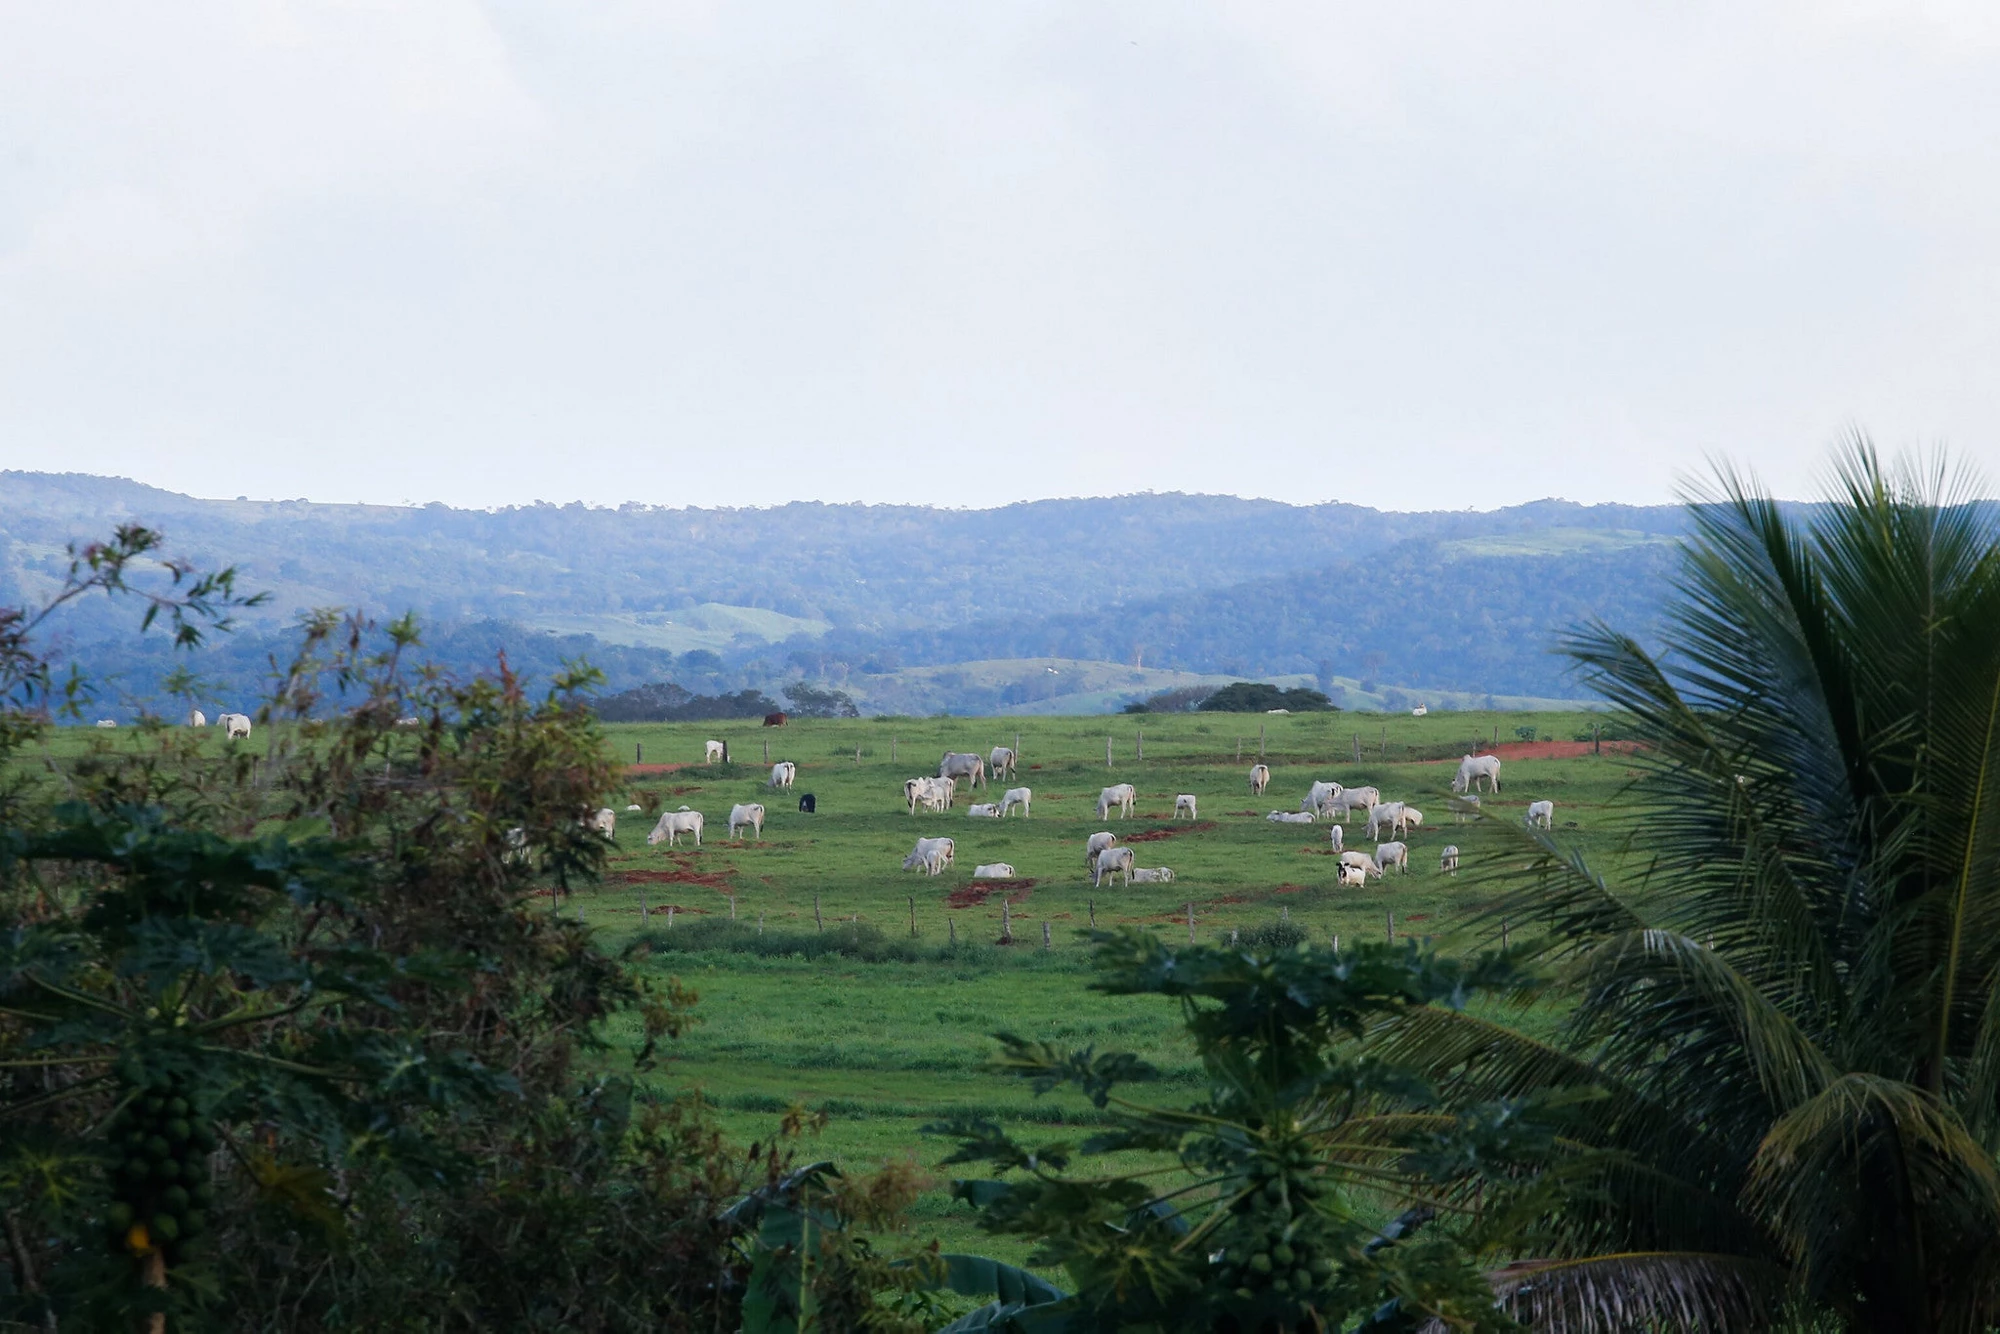 Santa Eliza de Goiás farm in Brazil is an example of the synergy between farming and sustainability